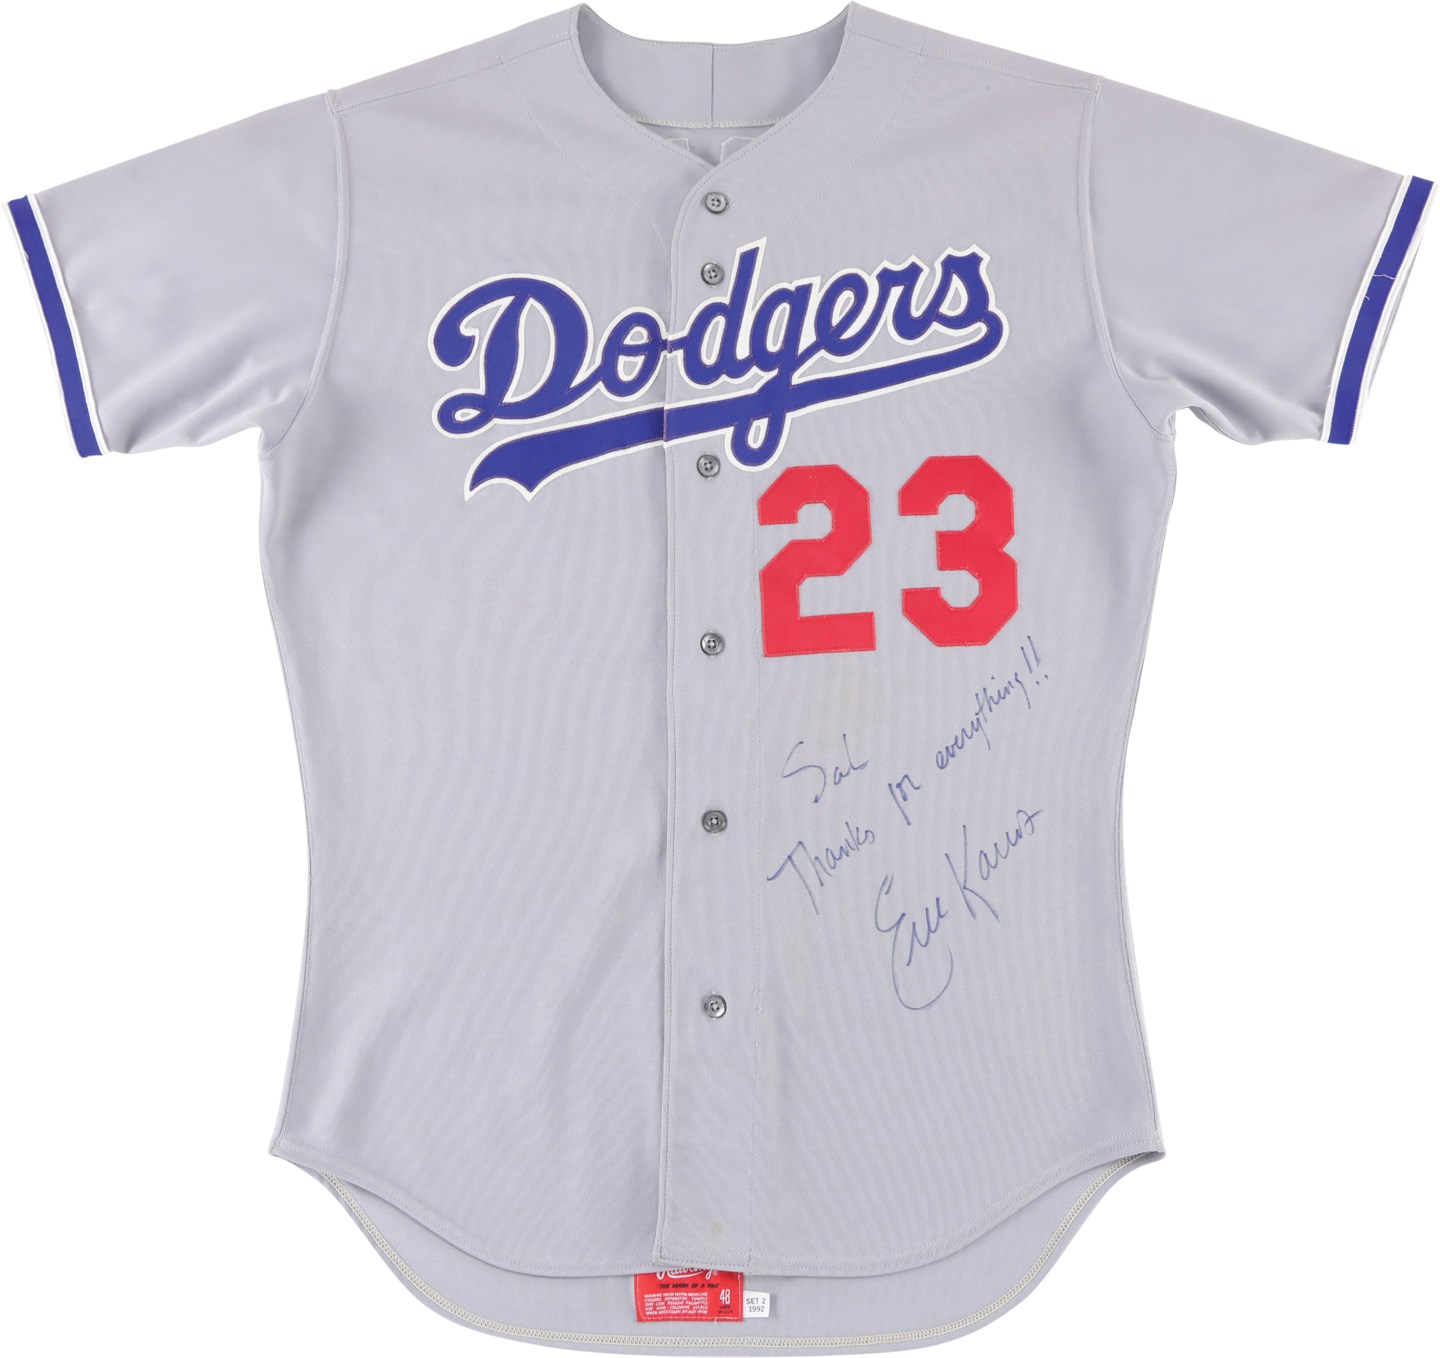 - 1992 Eric Karros Rookie of the Year Los Angeles Dodgers Game Worn Jersey - Signed to Sal LaRocca